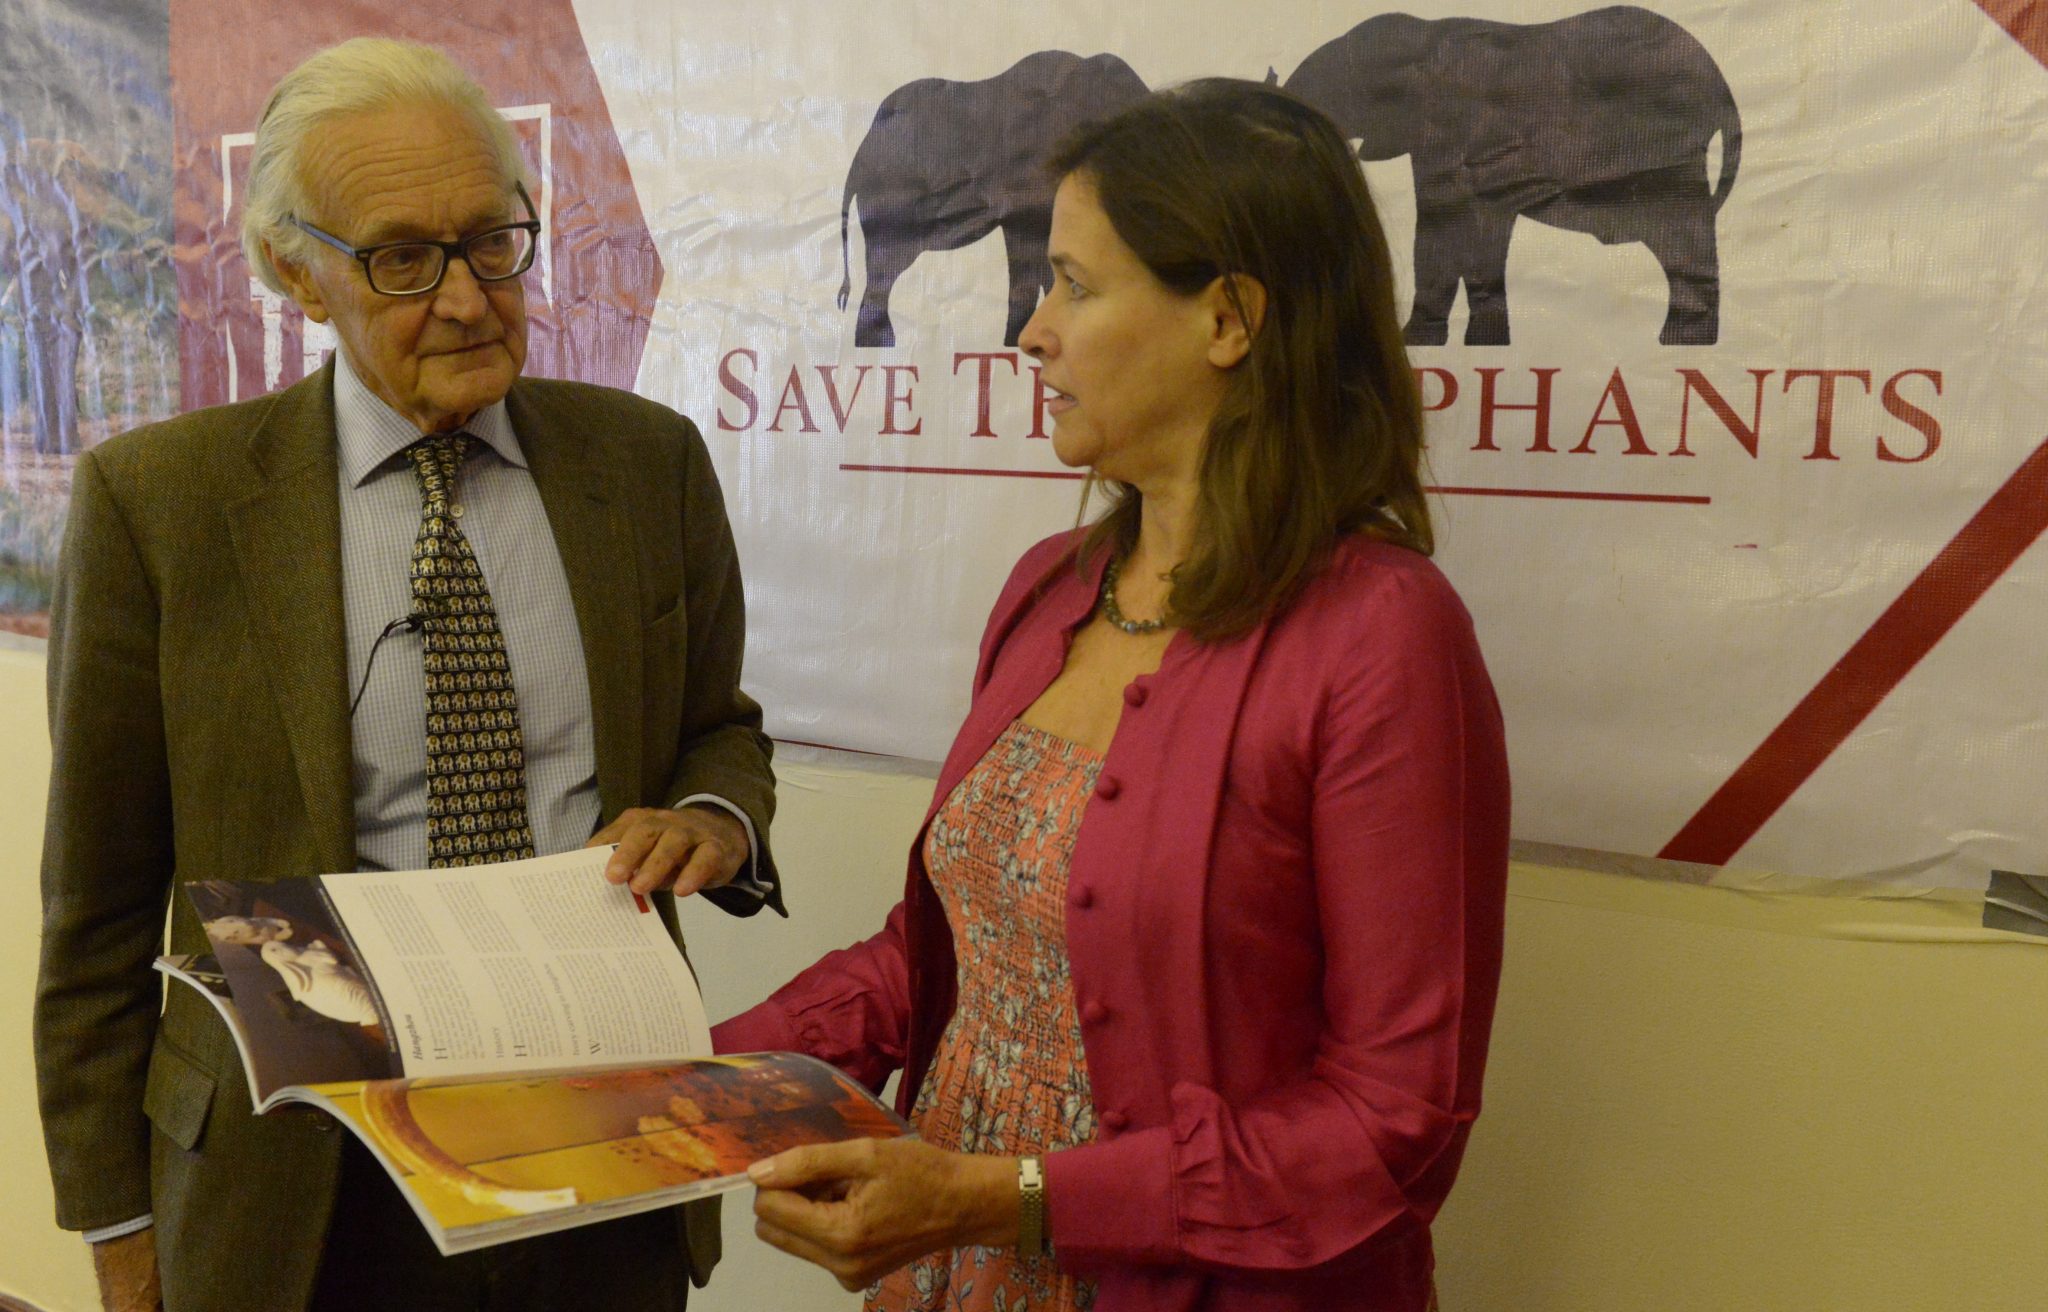 Iain Douglas -Hamilton, founder of Save The Elephants (STE) and leading authority on the African Elephant (L) accompanied by Lucy Vigne, Ivory researcher, look at a report documenting the decline of the wholesale price of raw ivory in China, on March 29, 2017 in Nairobi. / AFP PHOTO / SIMON MAINA